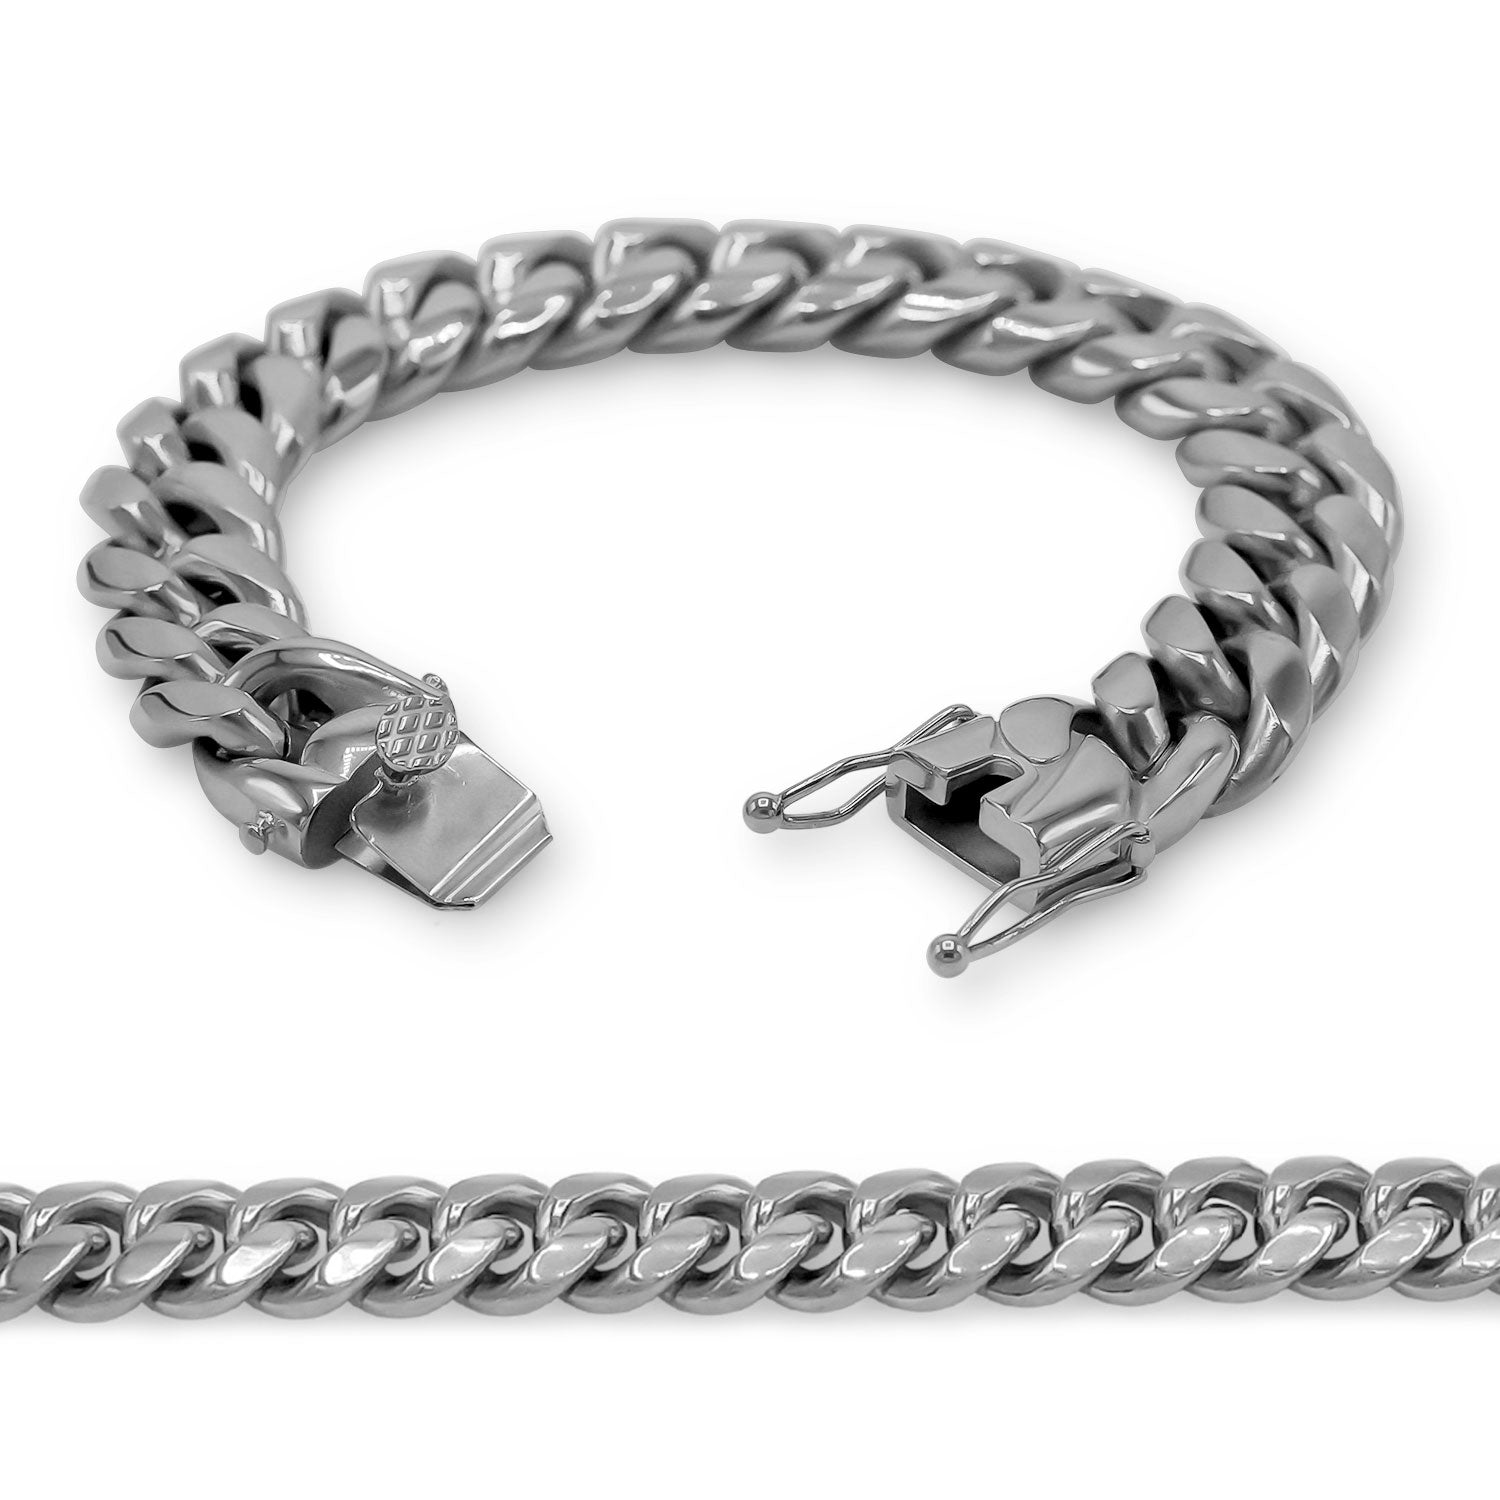 Invicta Jewelry Men's Stainless Steel Curb Link Bracelet - ShopHQ.com